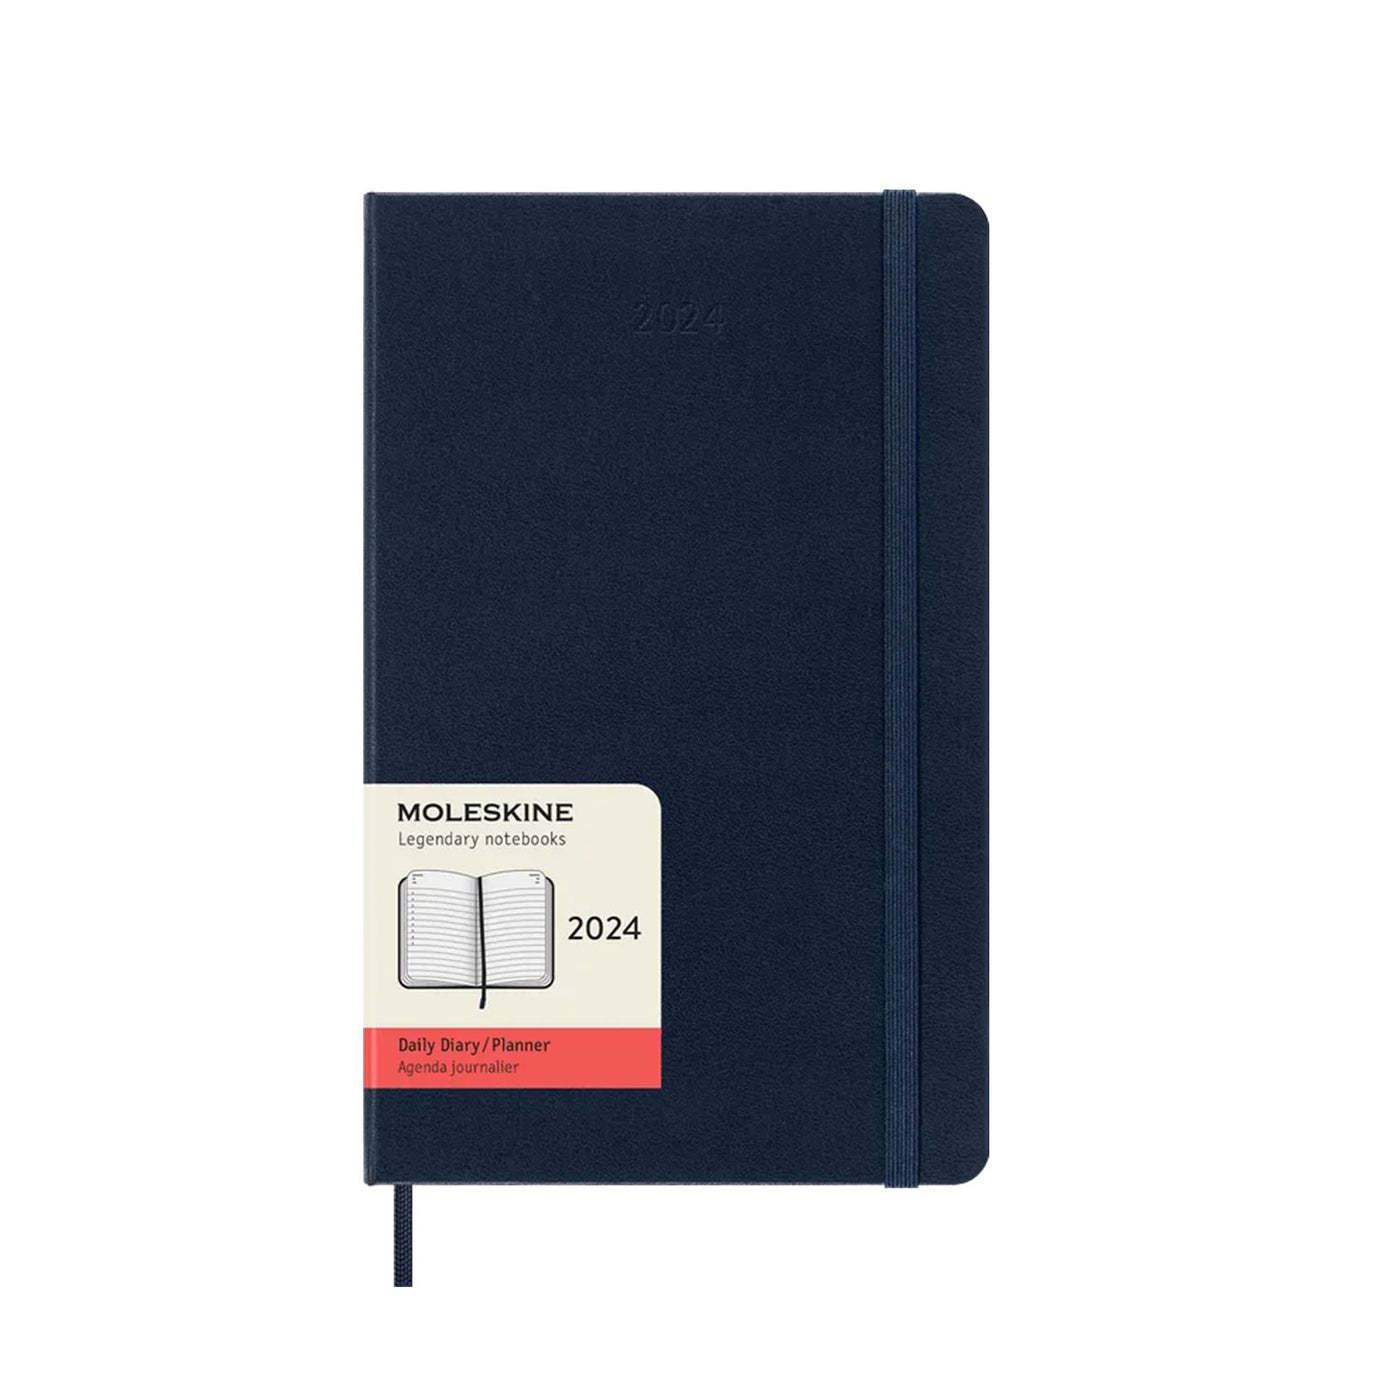 Moleskine 2024 Classic Large Hard Cover Daily Planner - Sapphire Blue 1